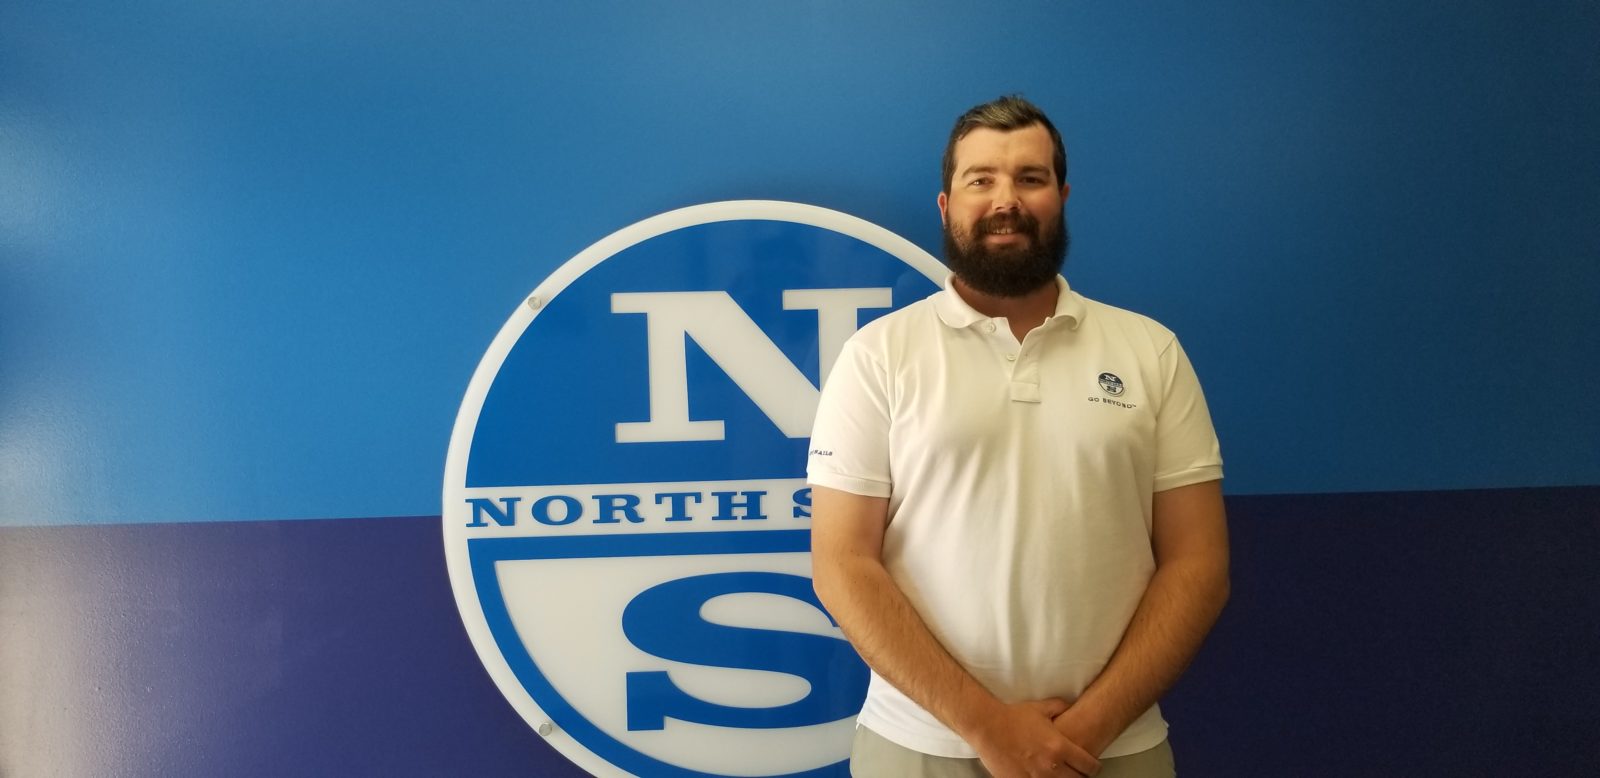 NORTH SAILS IN DETROIT WELCOMES NEW EXPERTISE